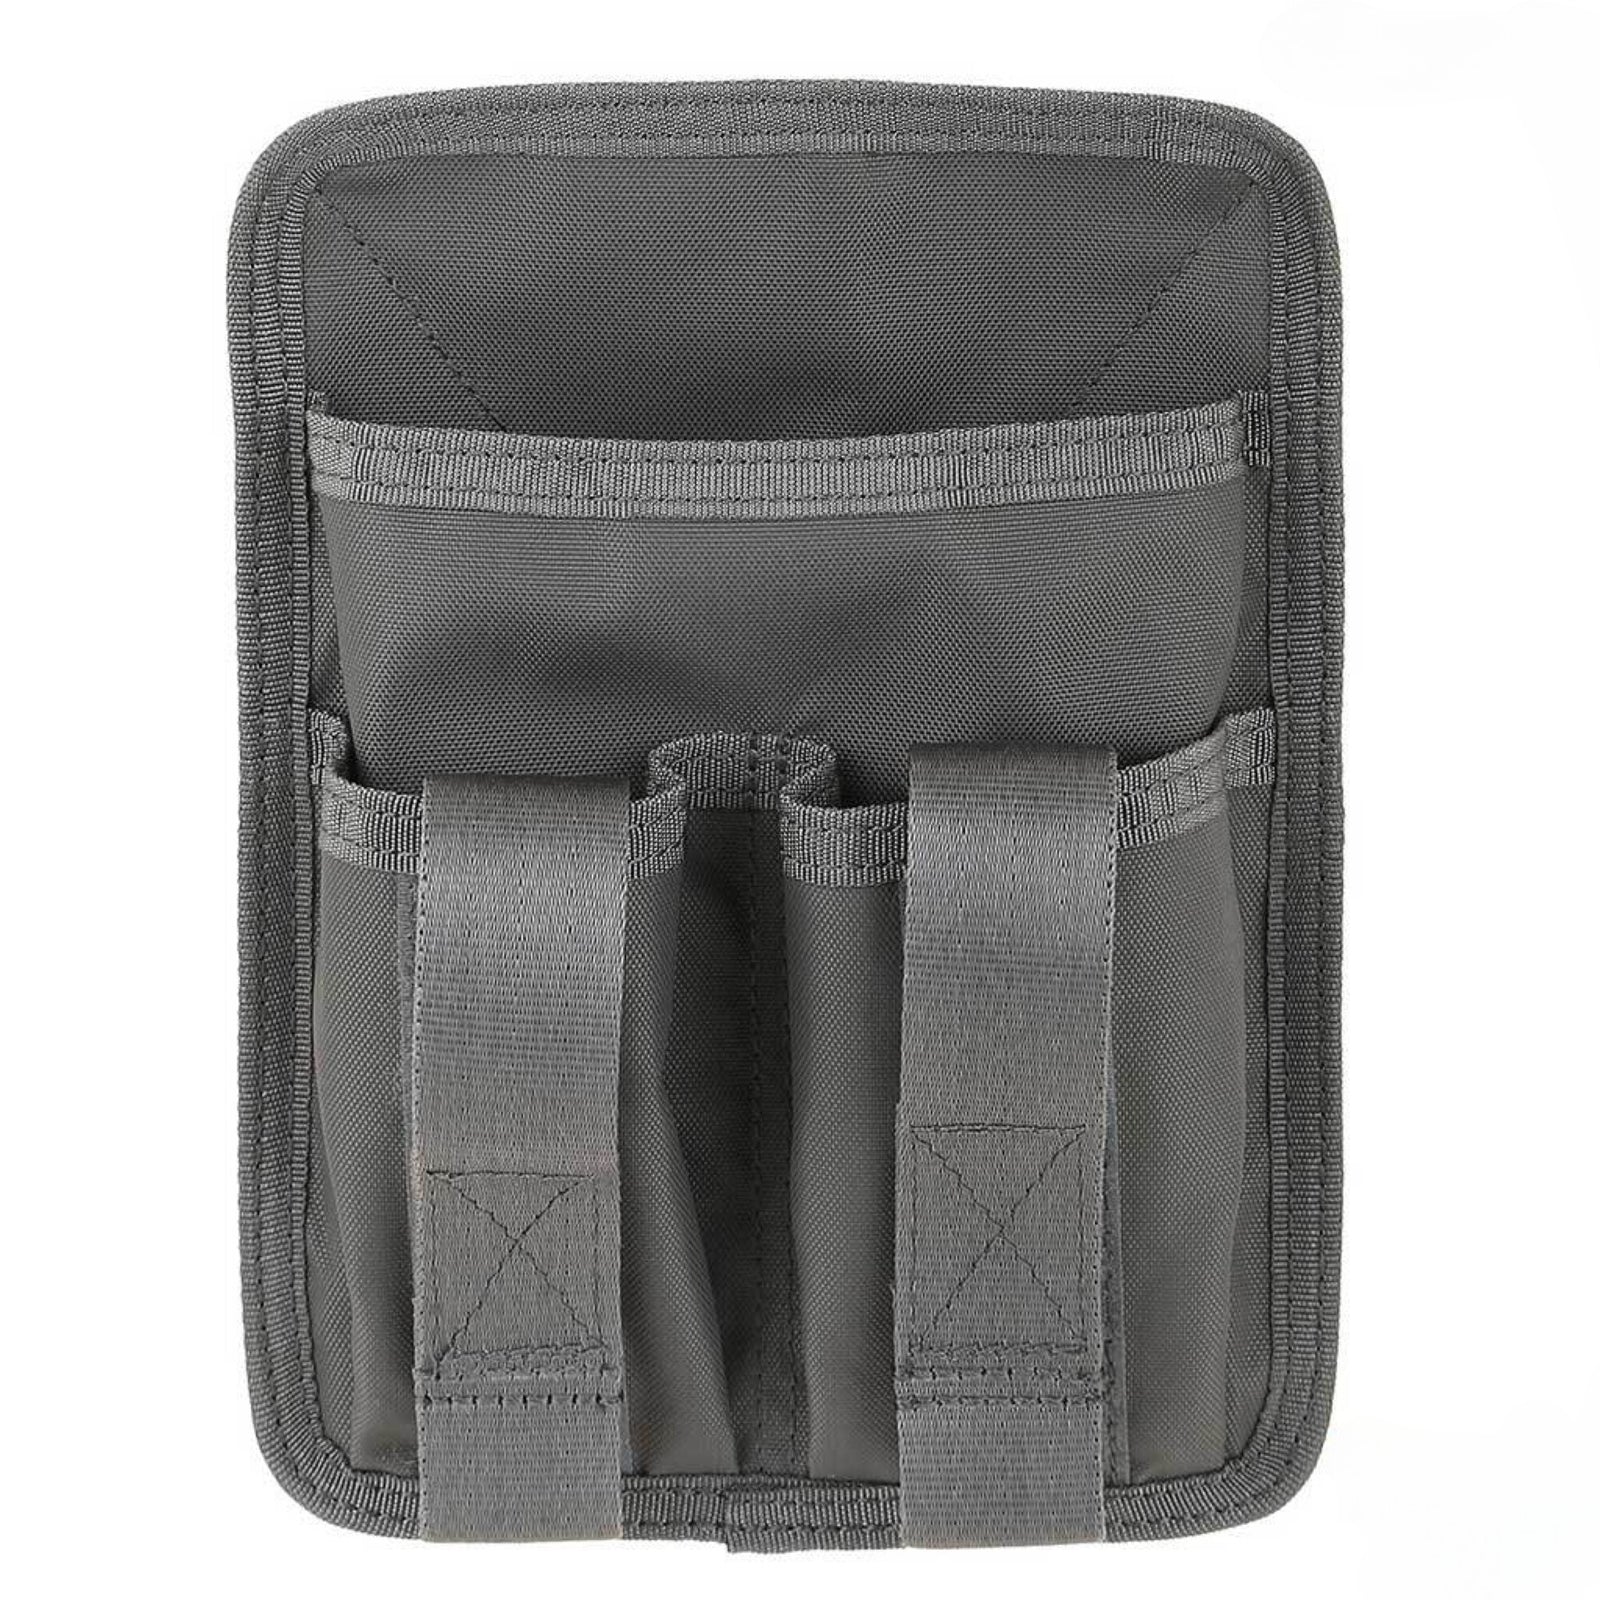 MAXPEDITION | ENTITY™ HOOK & LOOP UTILITY PANEL - Pannello utility velcrato